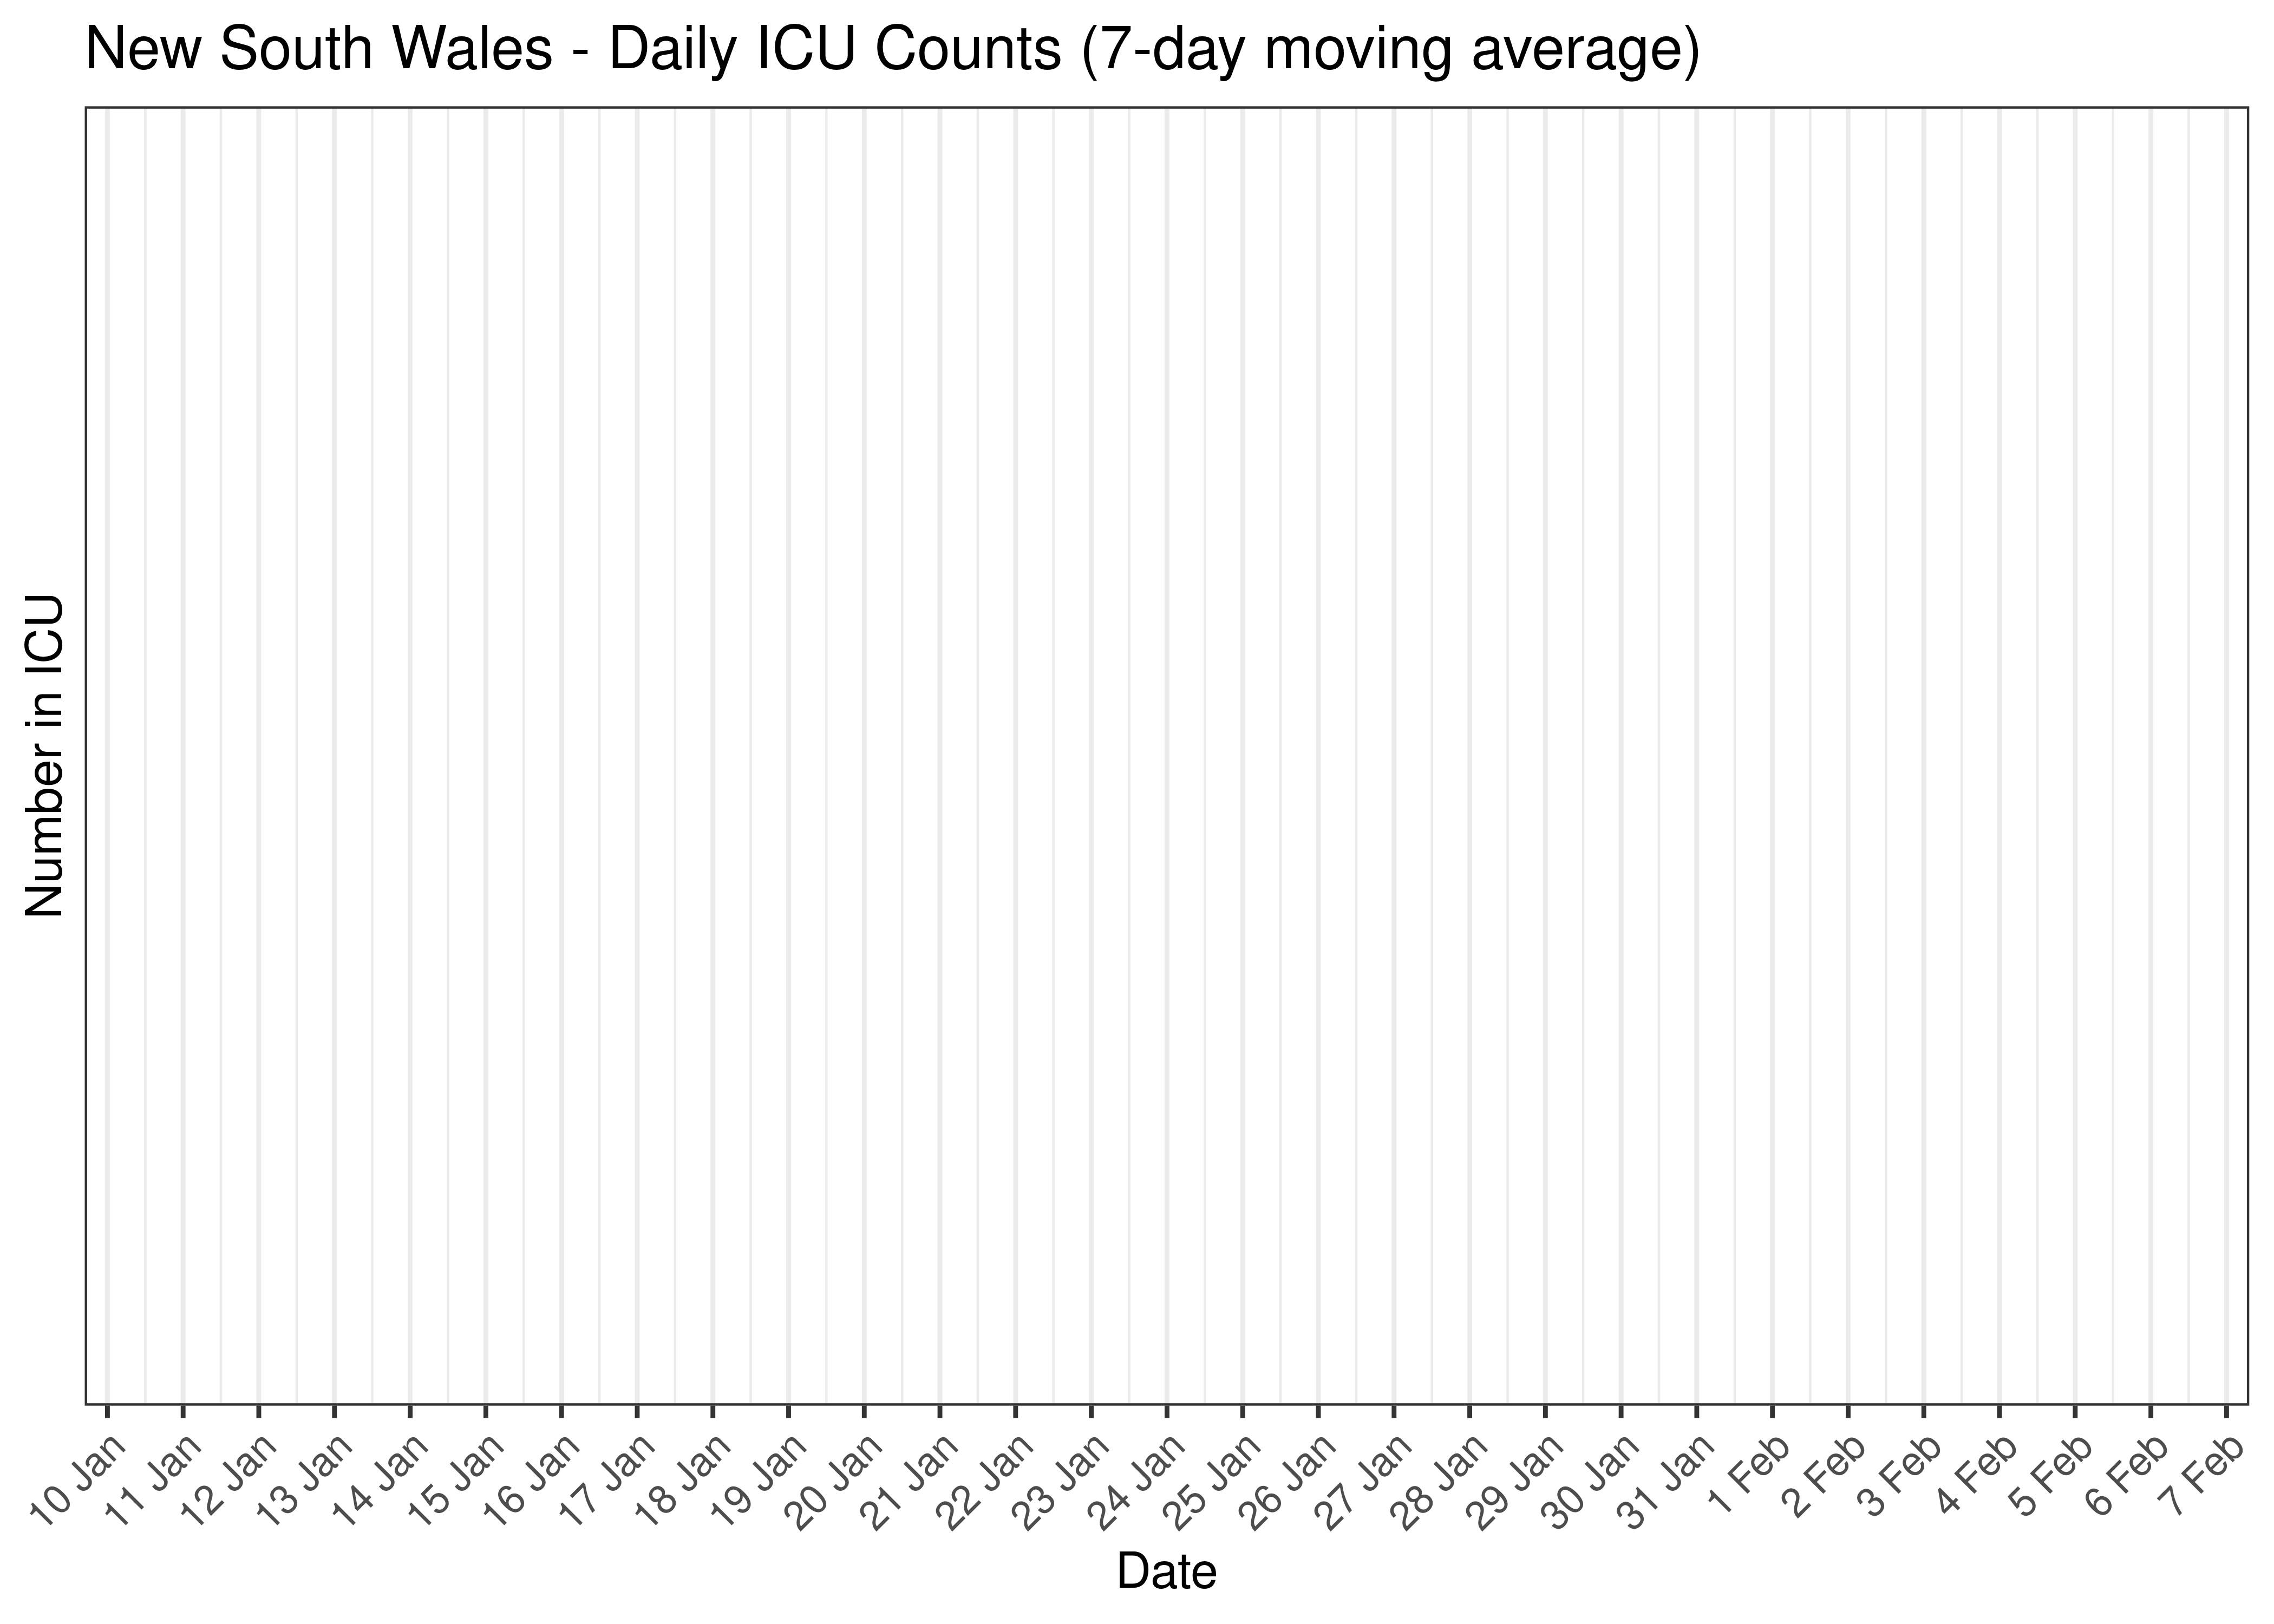 New South Wales - Daily ICU Counts for Last 30-days (7-day moving average)